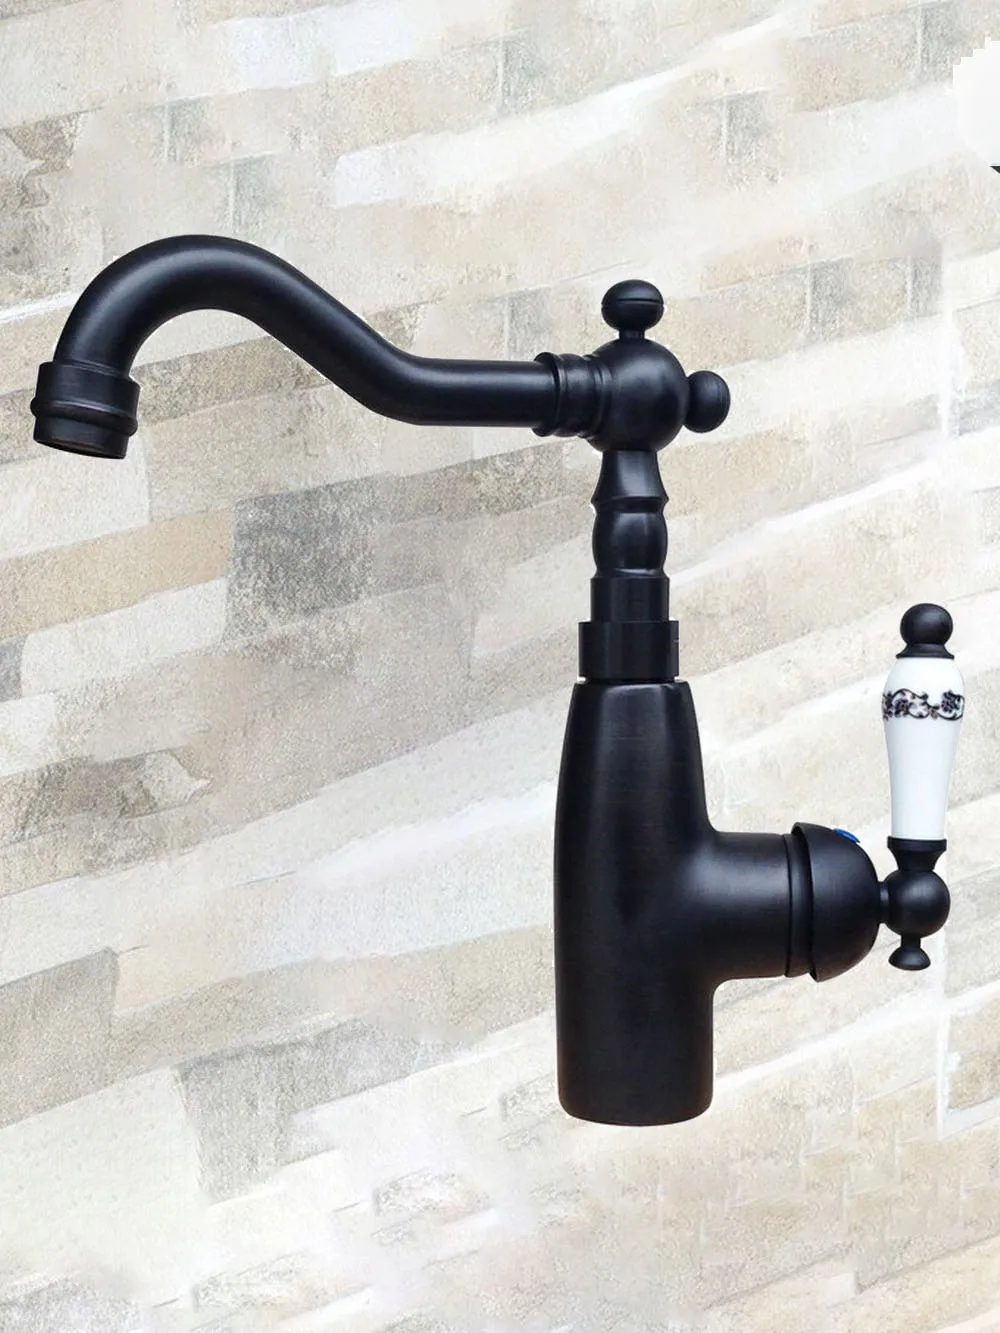 

Black Oil Rubbed Brass Bathroom Faucet Single Handle Basin Mixer Sink Taps Cold / Hot Water Faucets Lsf108